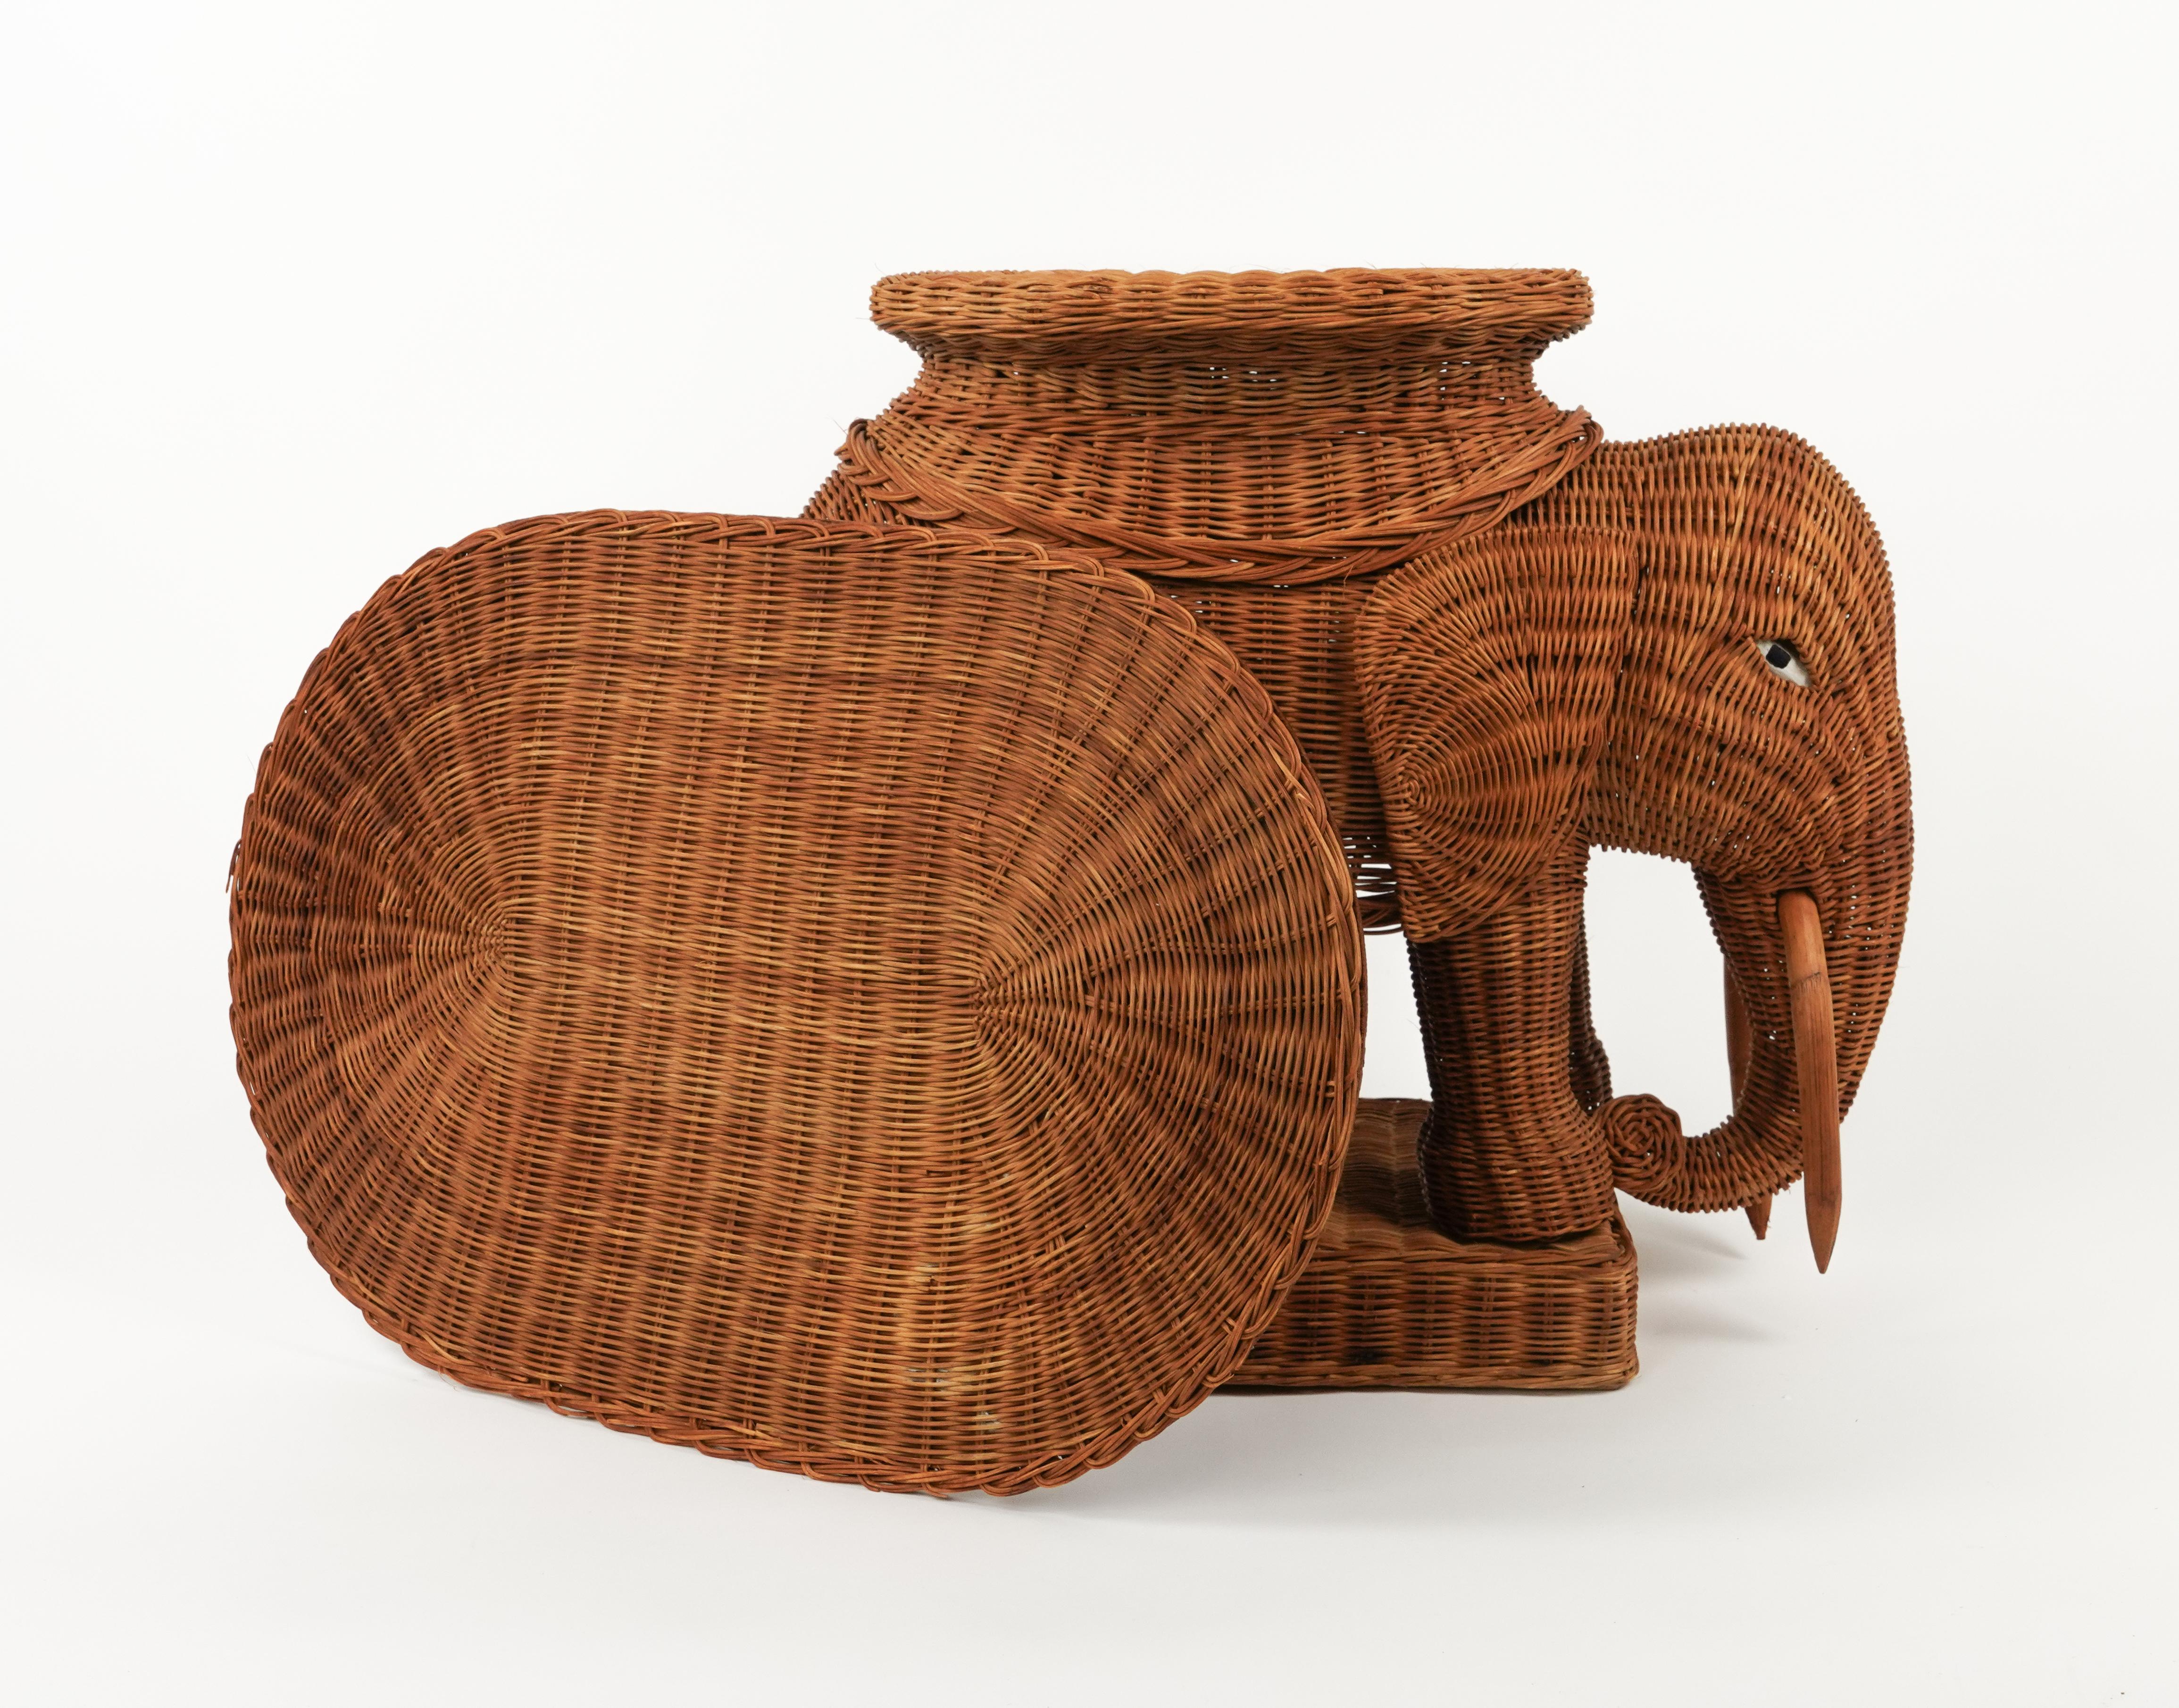 Italian Rattan and Wicker Elephant Side Coffee Table Vivai Del Sud Style, Italy, 1960s For Sale